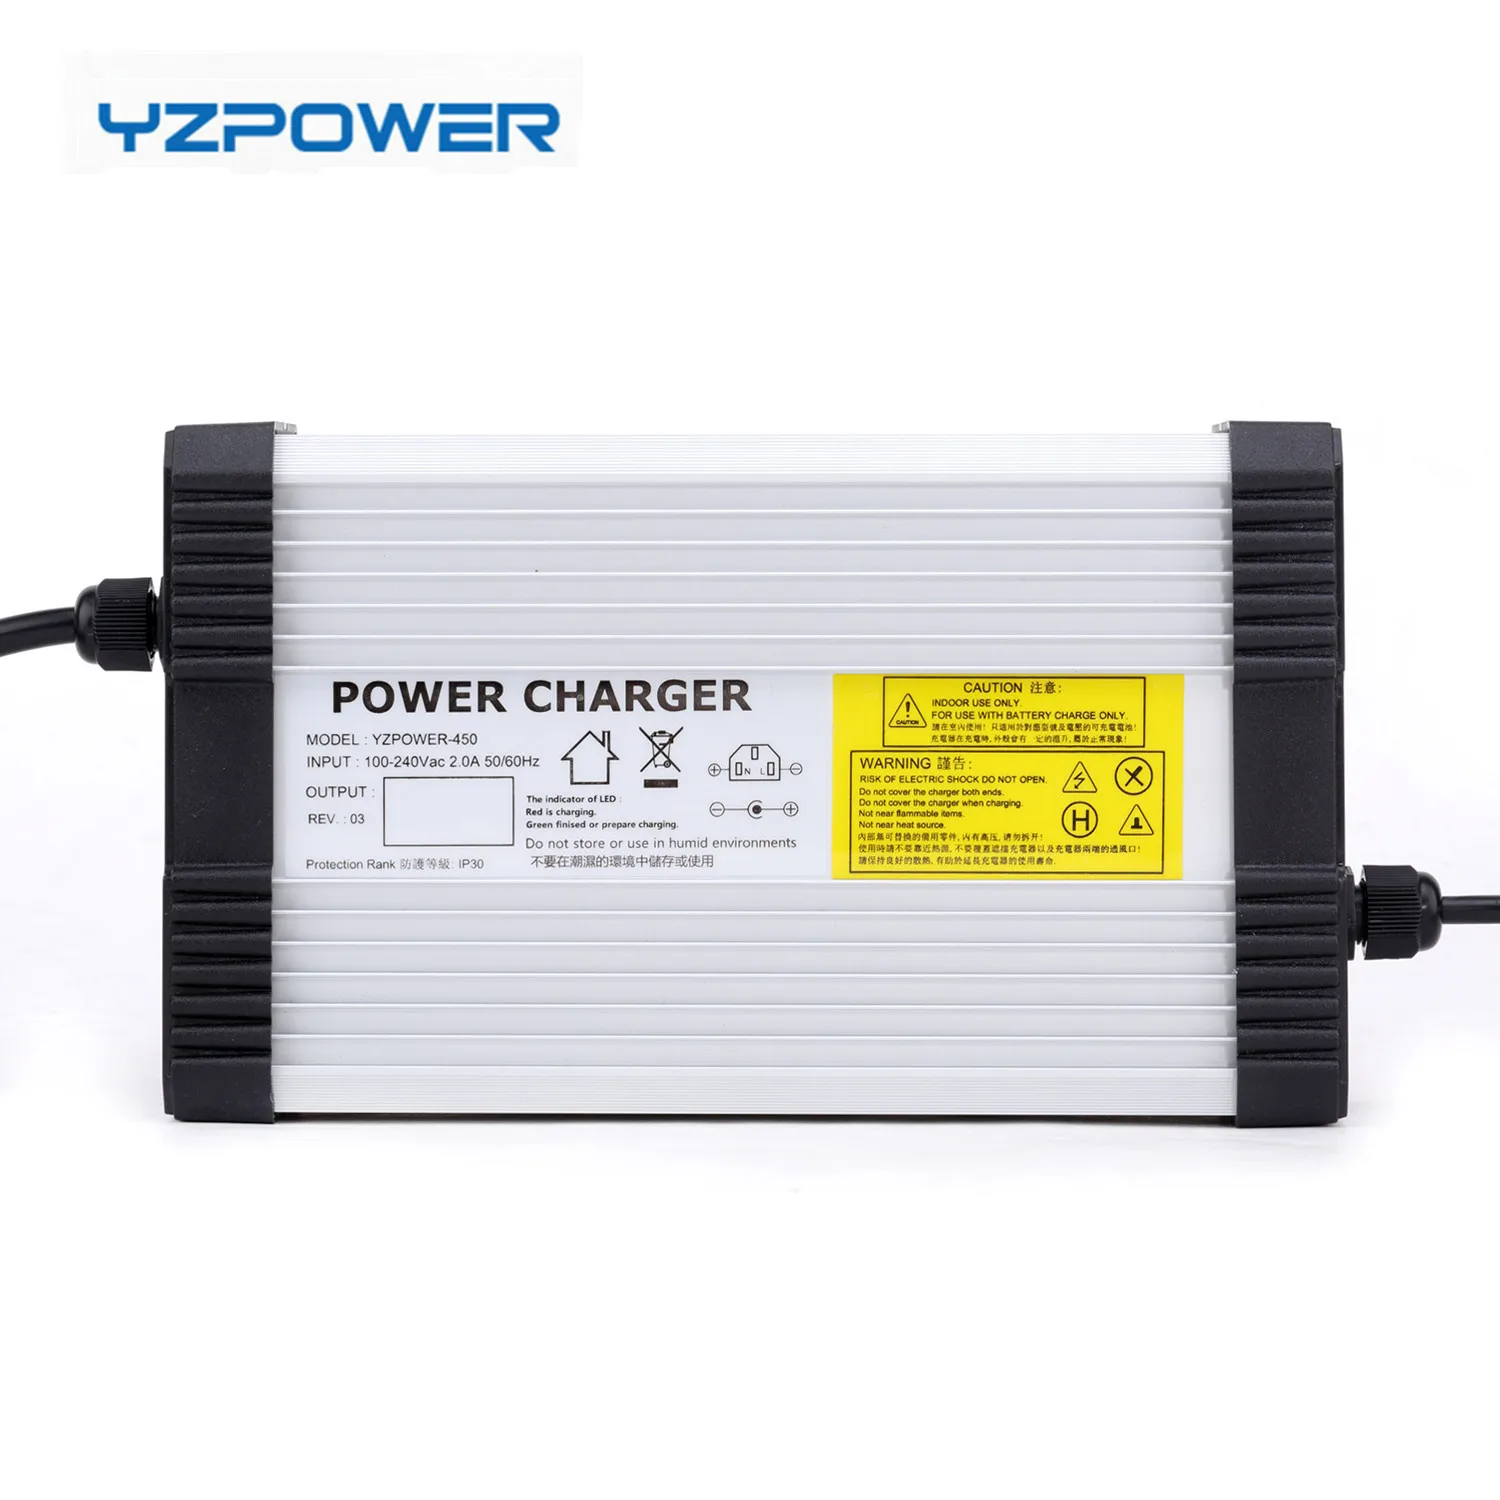 

YZPOWER 54.6V6A 48V Battery Chargeraluminum Case Charger With SAA CE FCC ROHS Certification, High power battery charger